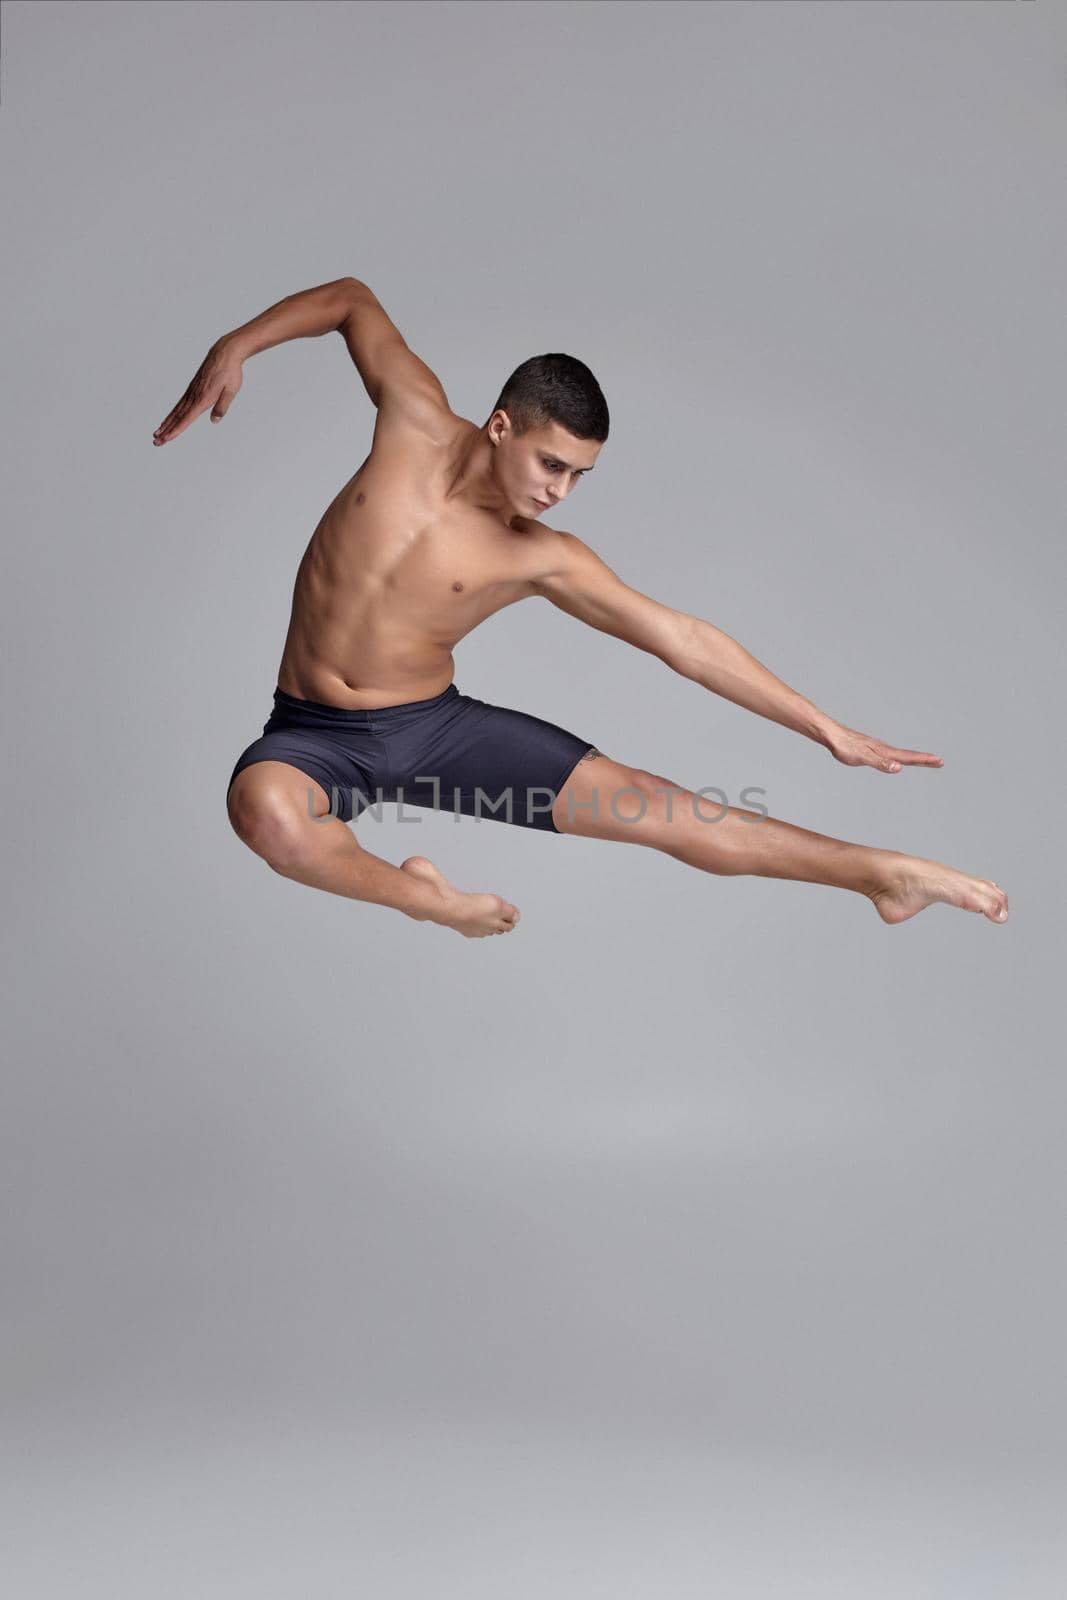 Portrait of a stately man ballet dancer, dressed in a black shorts. He is jumping on a gray background in studio. Bare legs and torso. Ballet and contemporary choreography concept. Art photo.